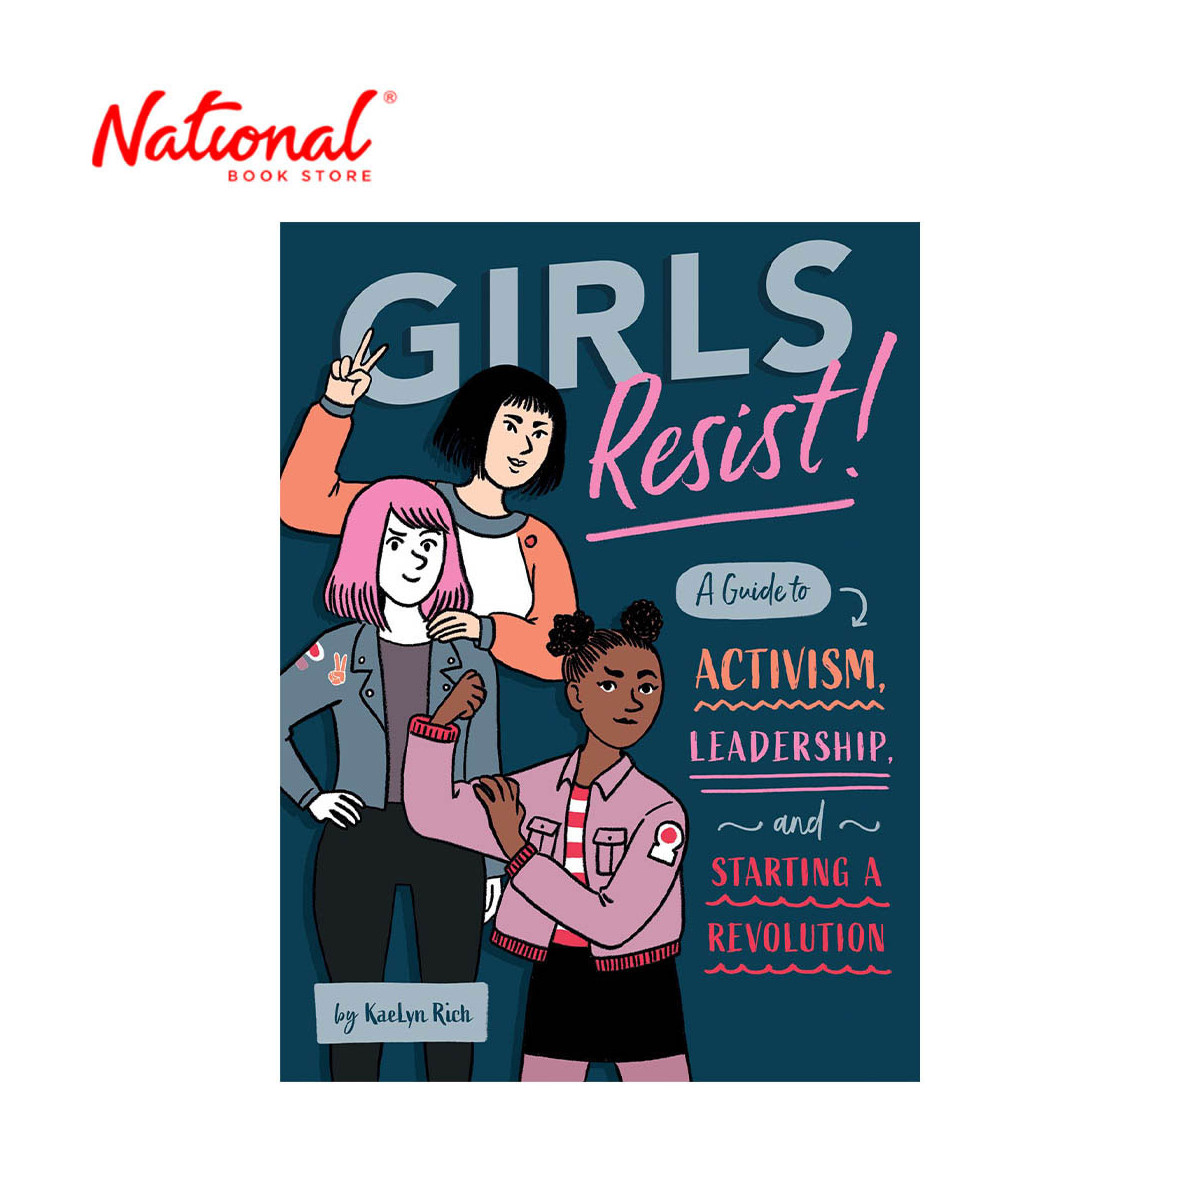 Girls Resist! by KaeLyn Rich - Trade Paperback - Teens Fiction